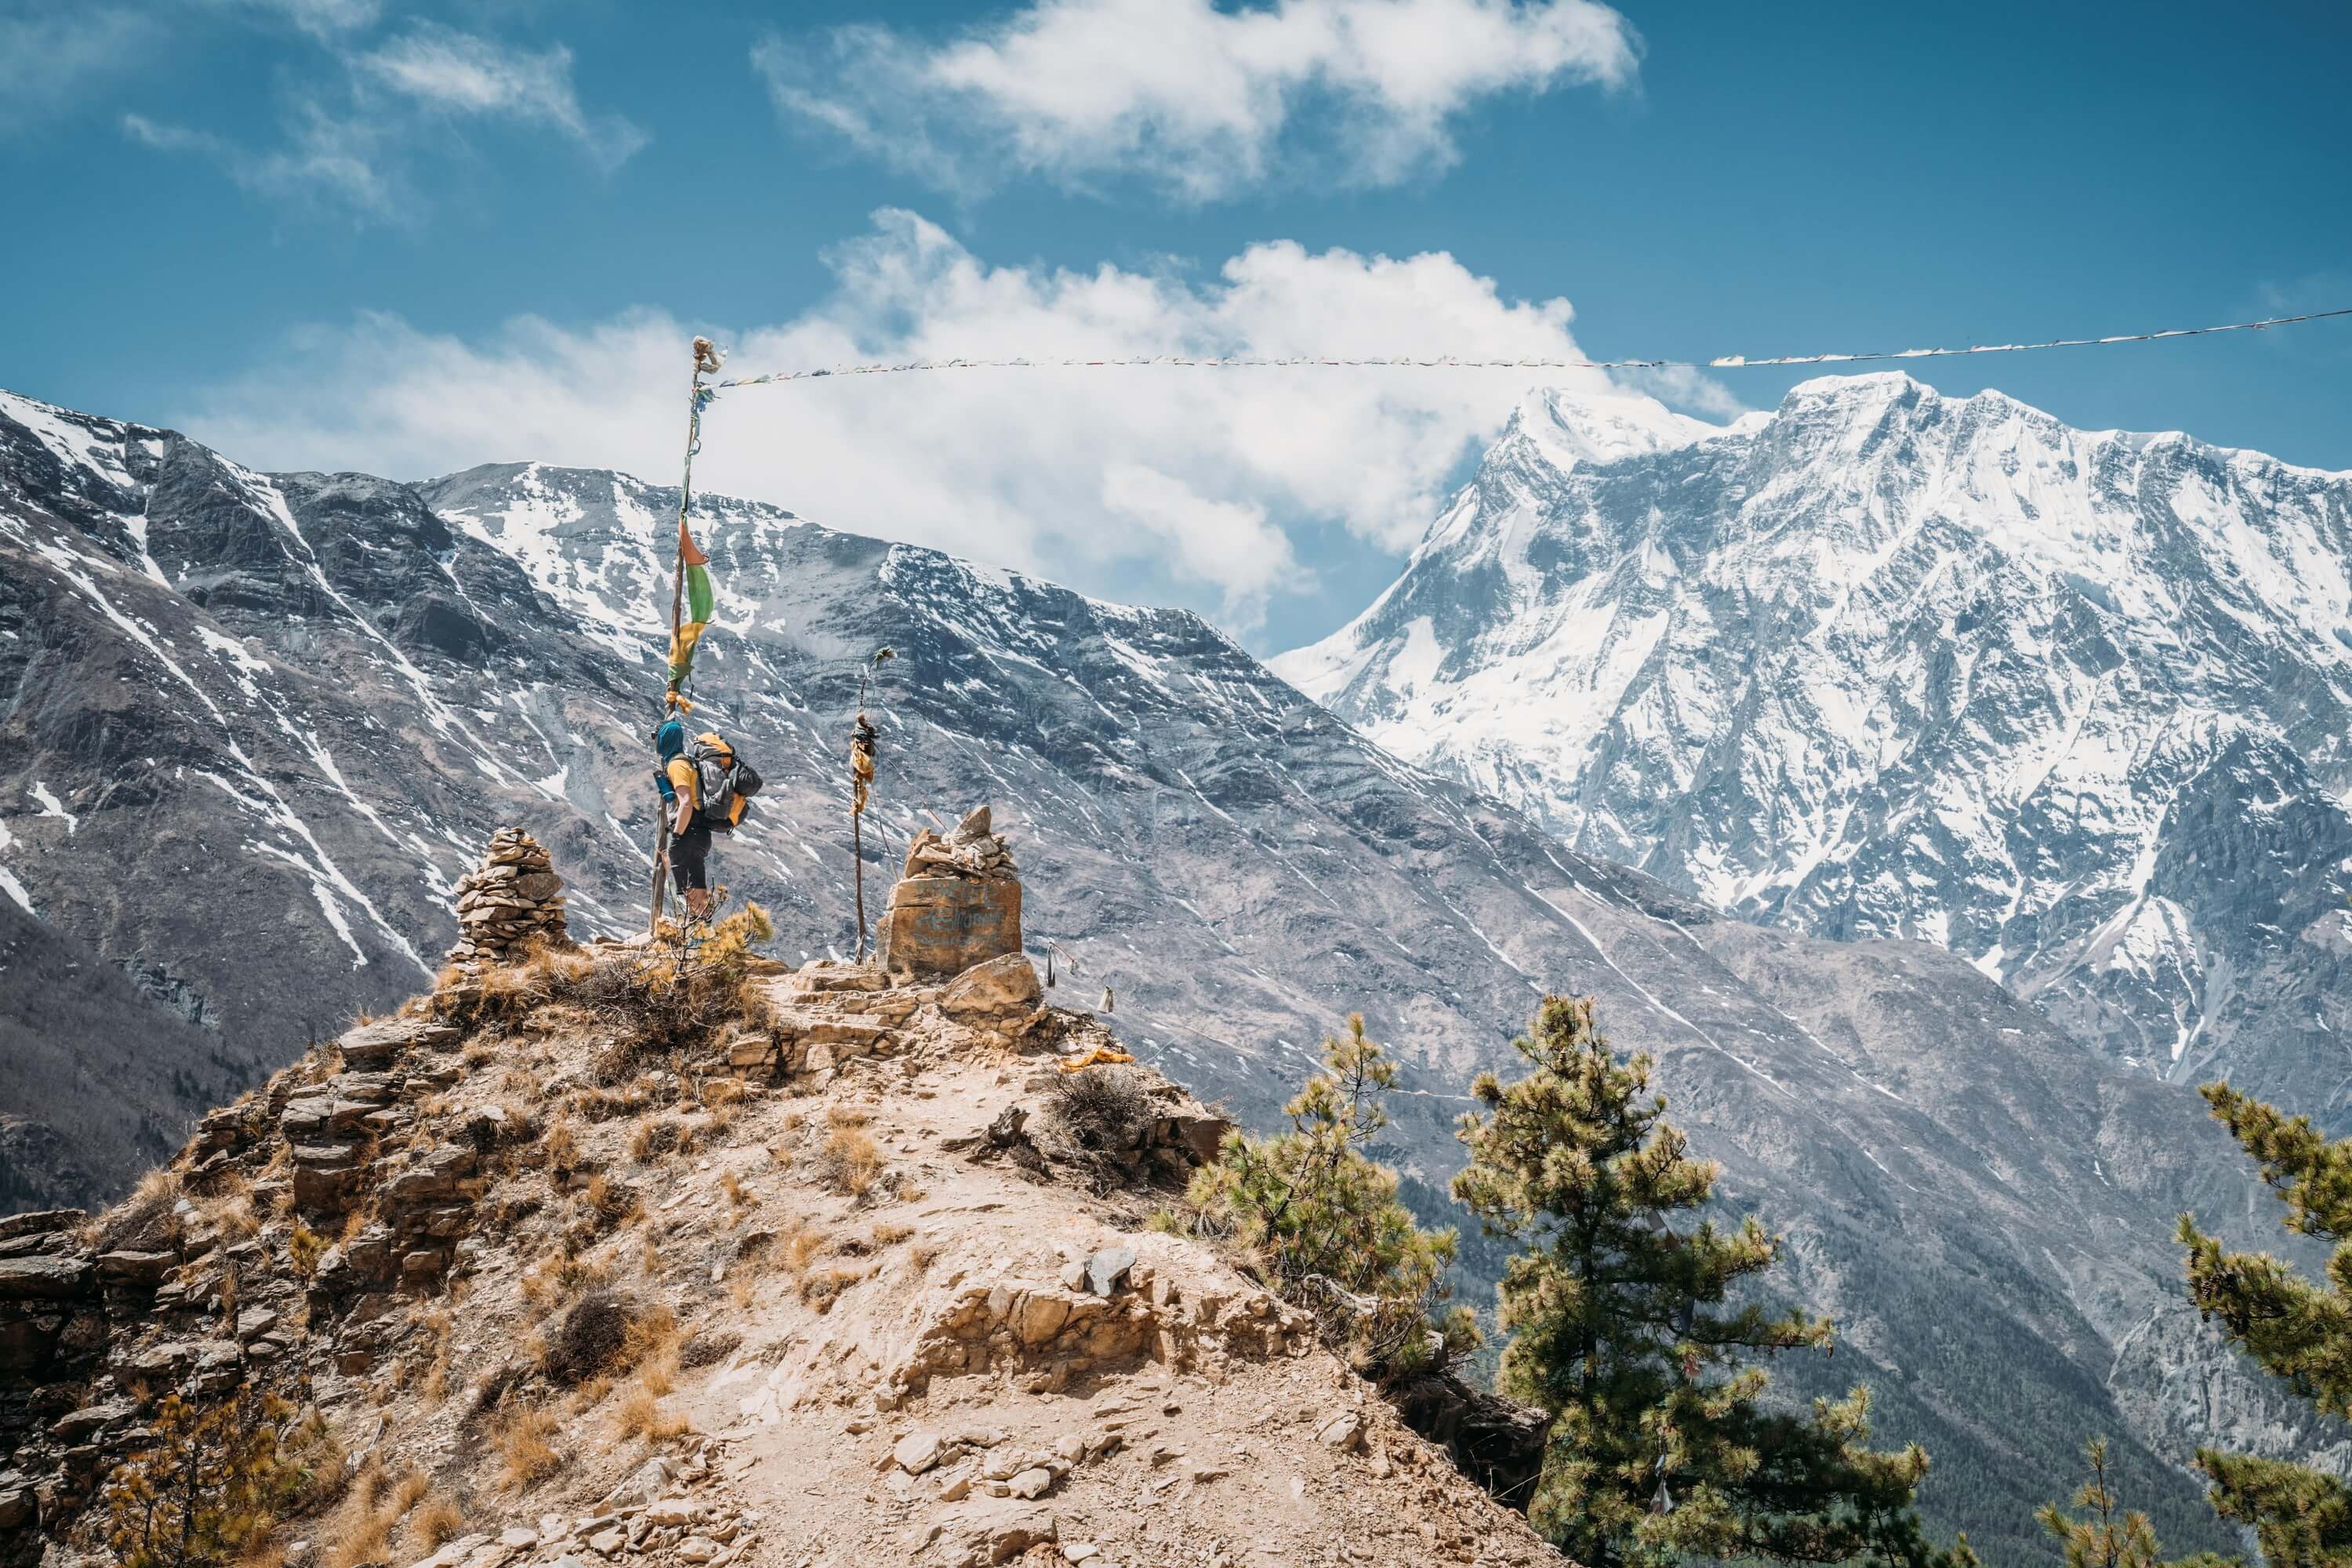 Annapurna or Manaslu Circuit? Which one is the best?